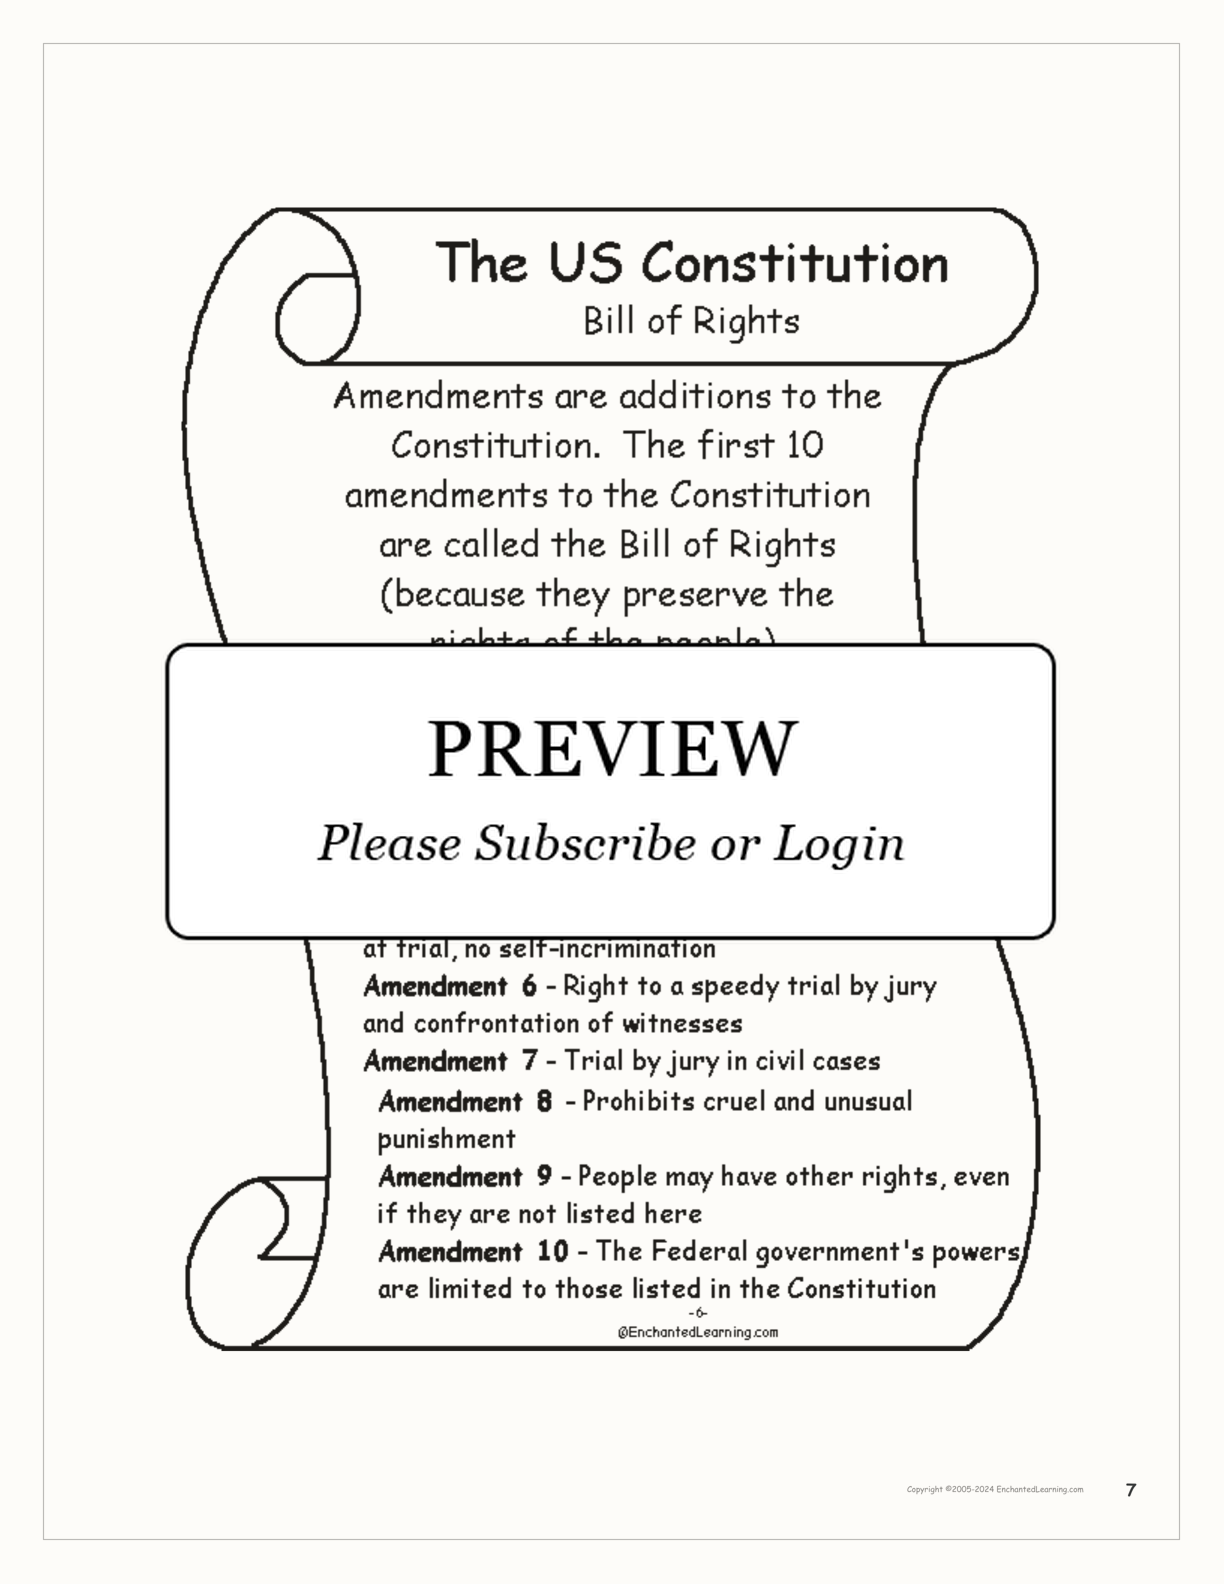 US Constitution Book interactive printout page 7